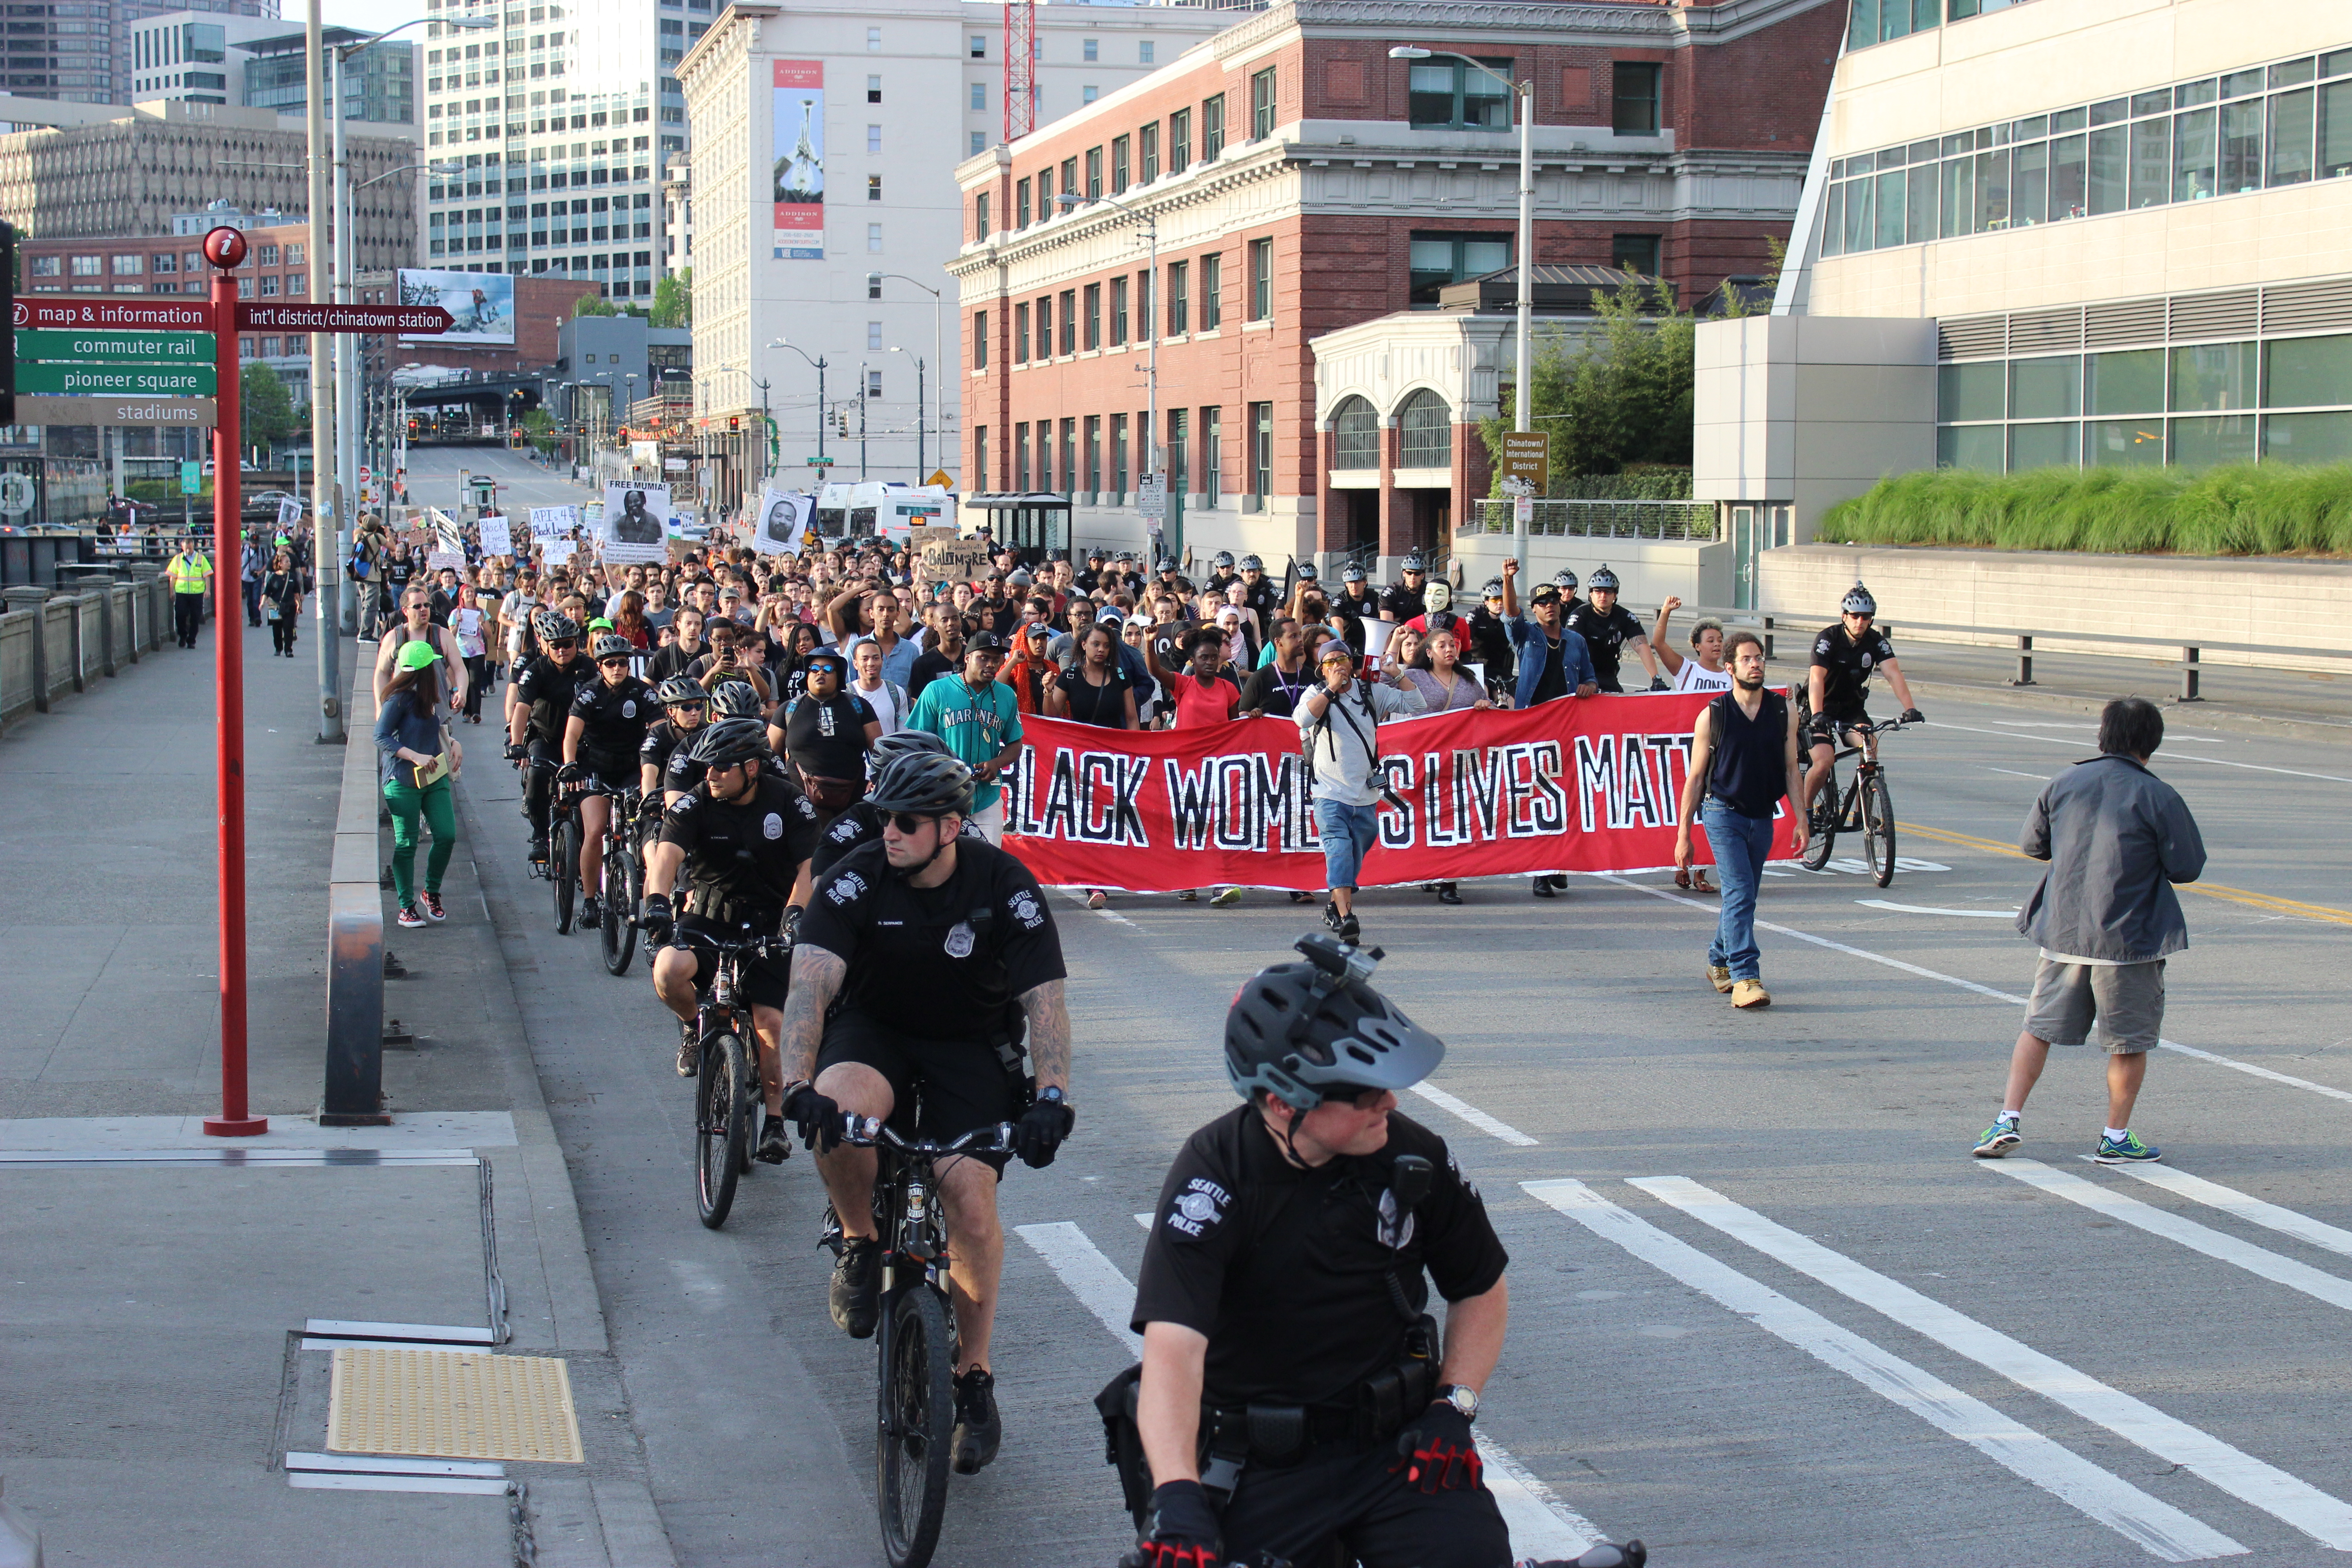 Saturday night, hundreds of Black Lives Matter activists marched through Seattle streets